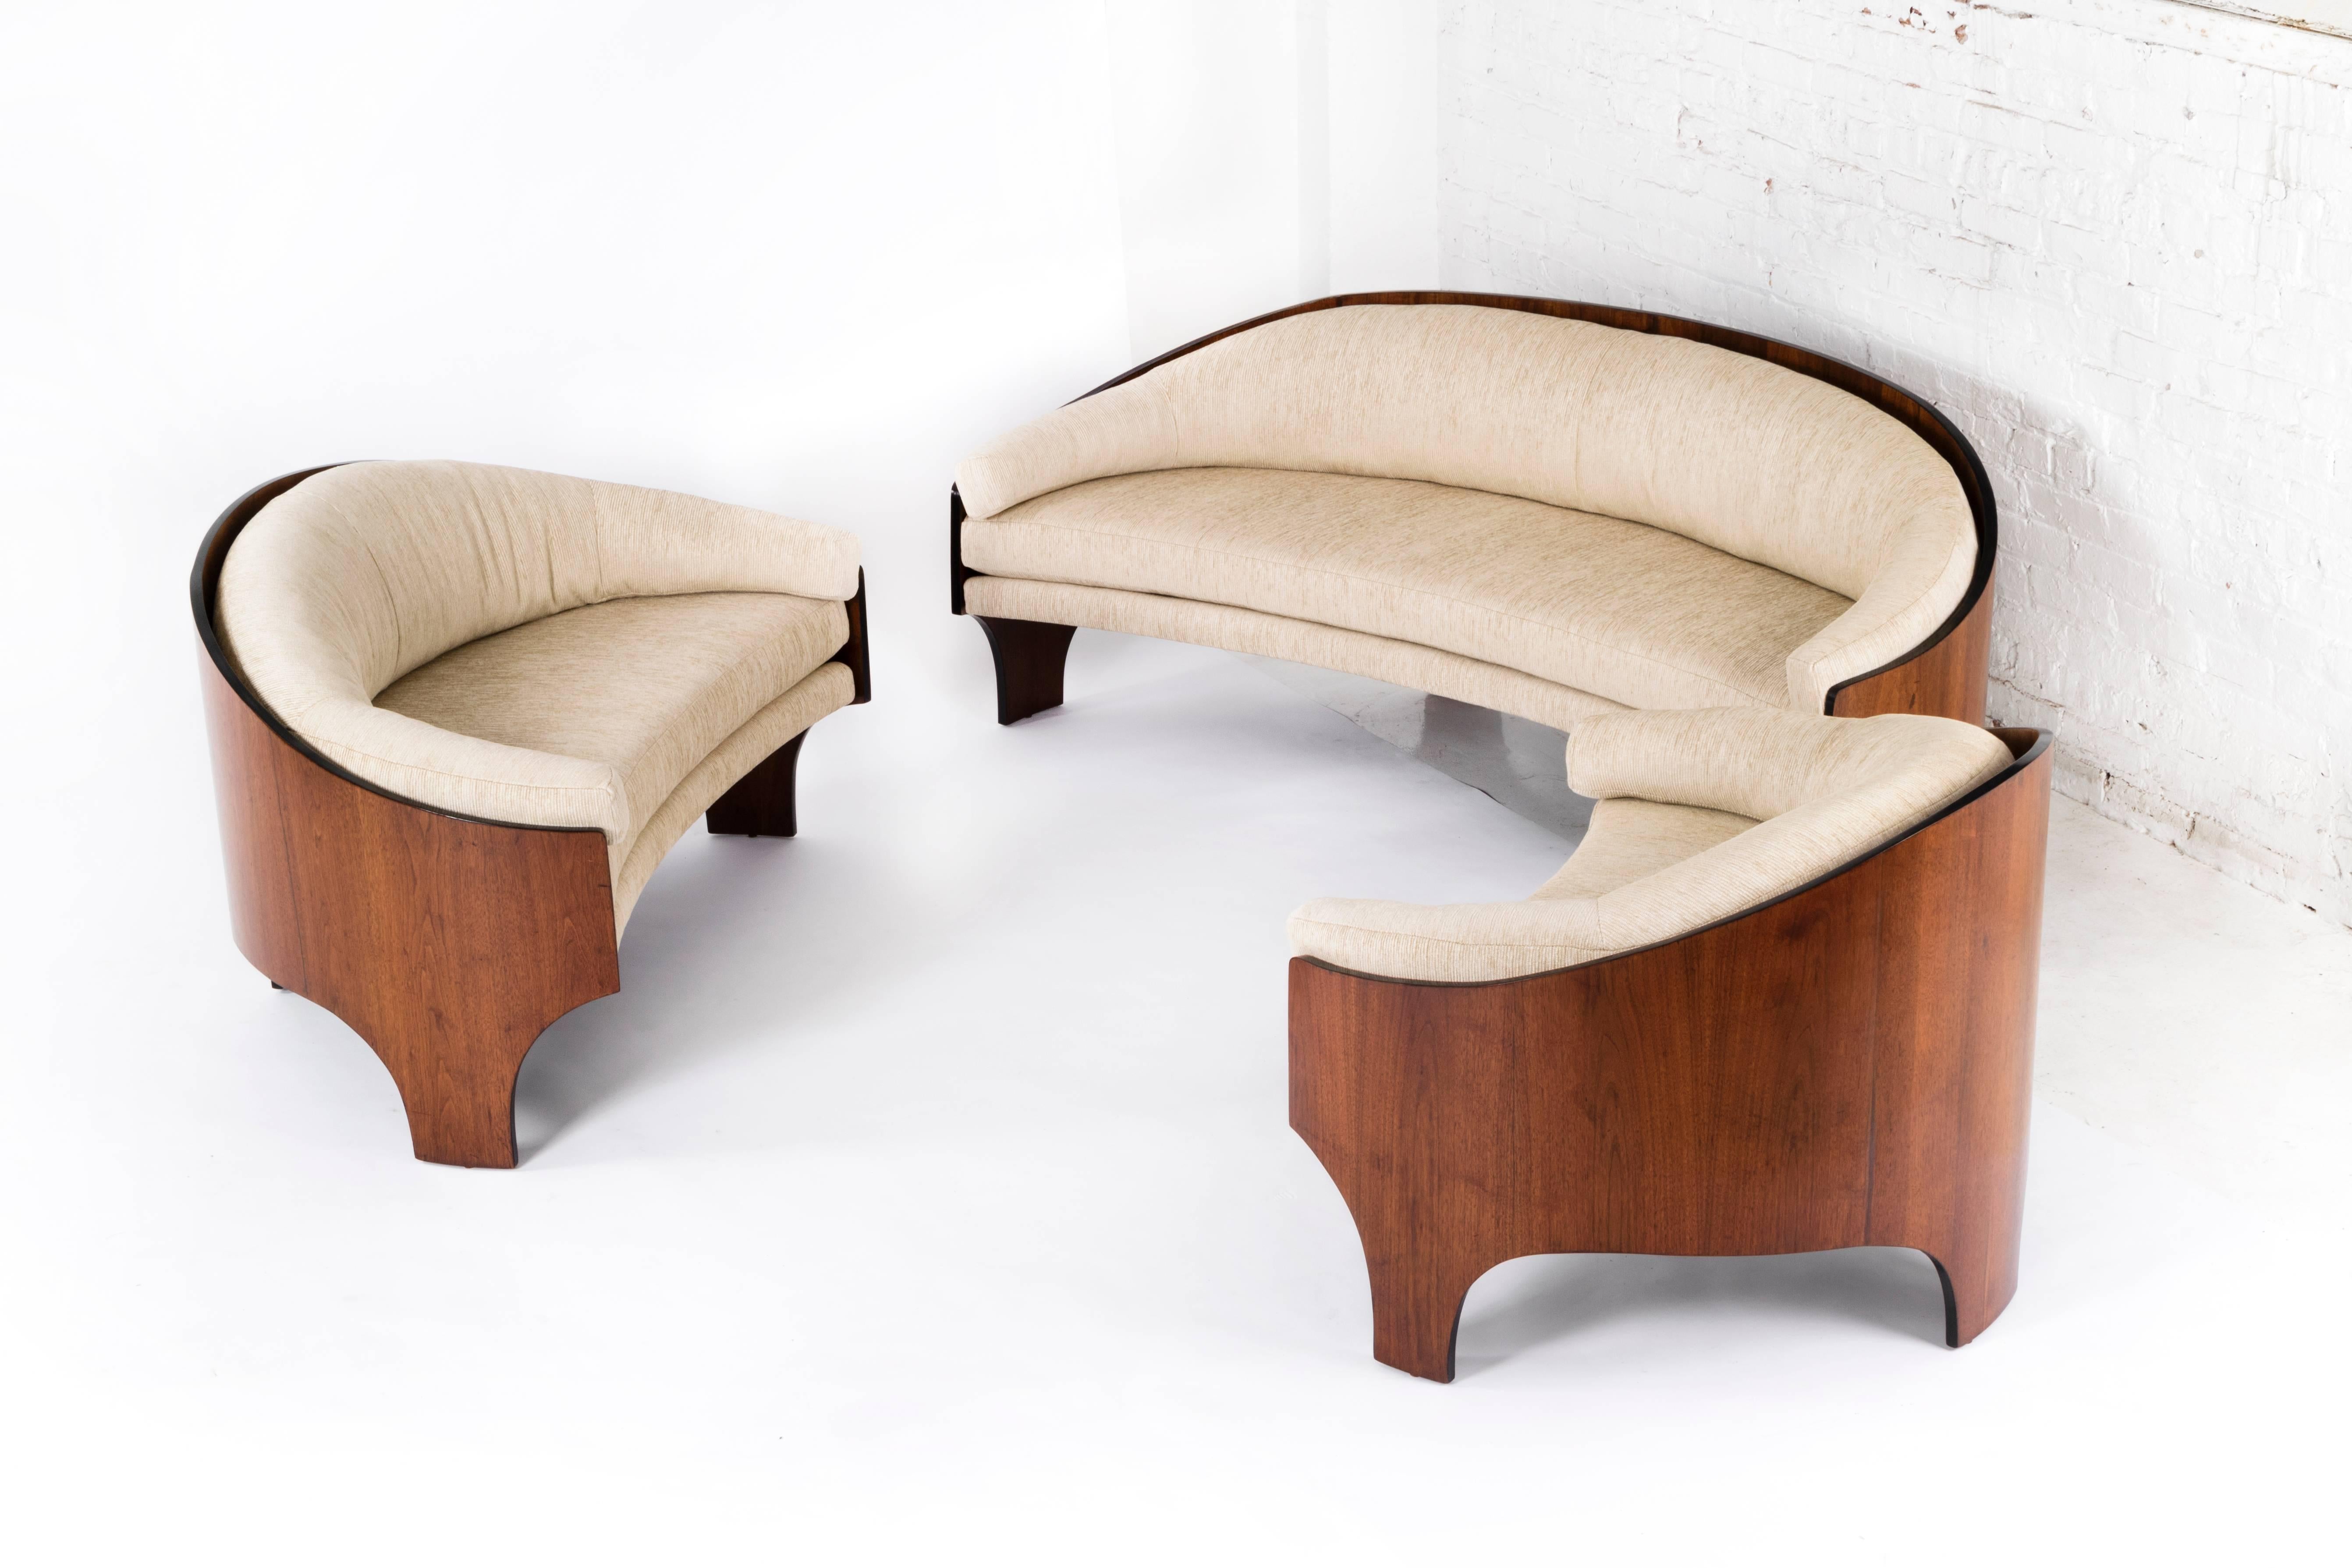 henry glass furniture